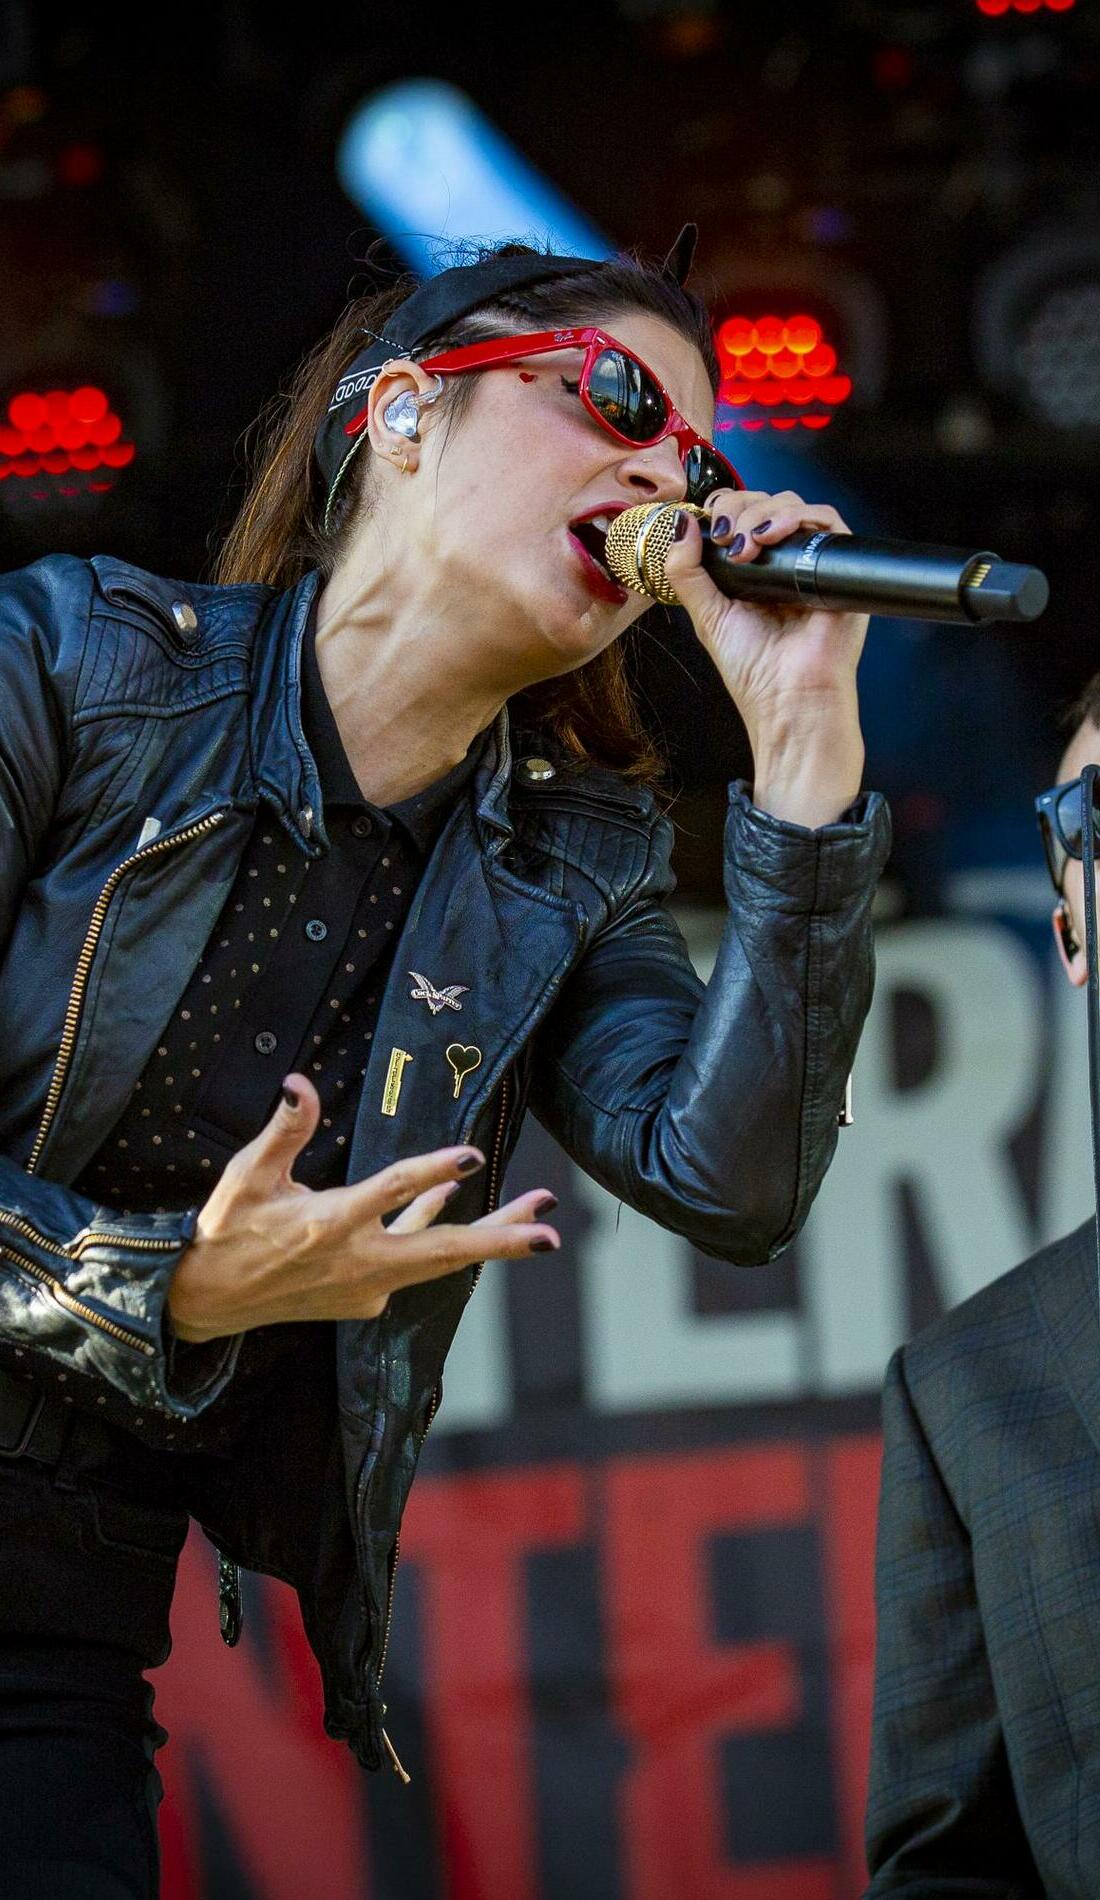 A The Interrupters live event